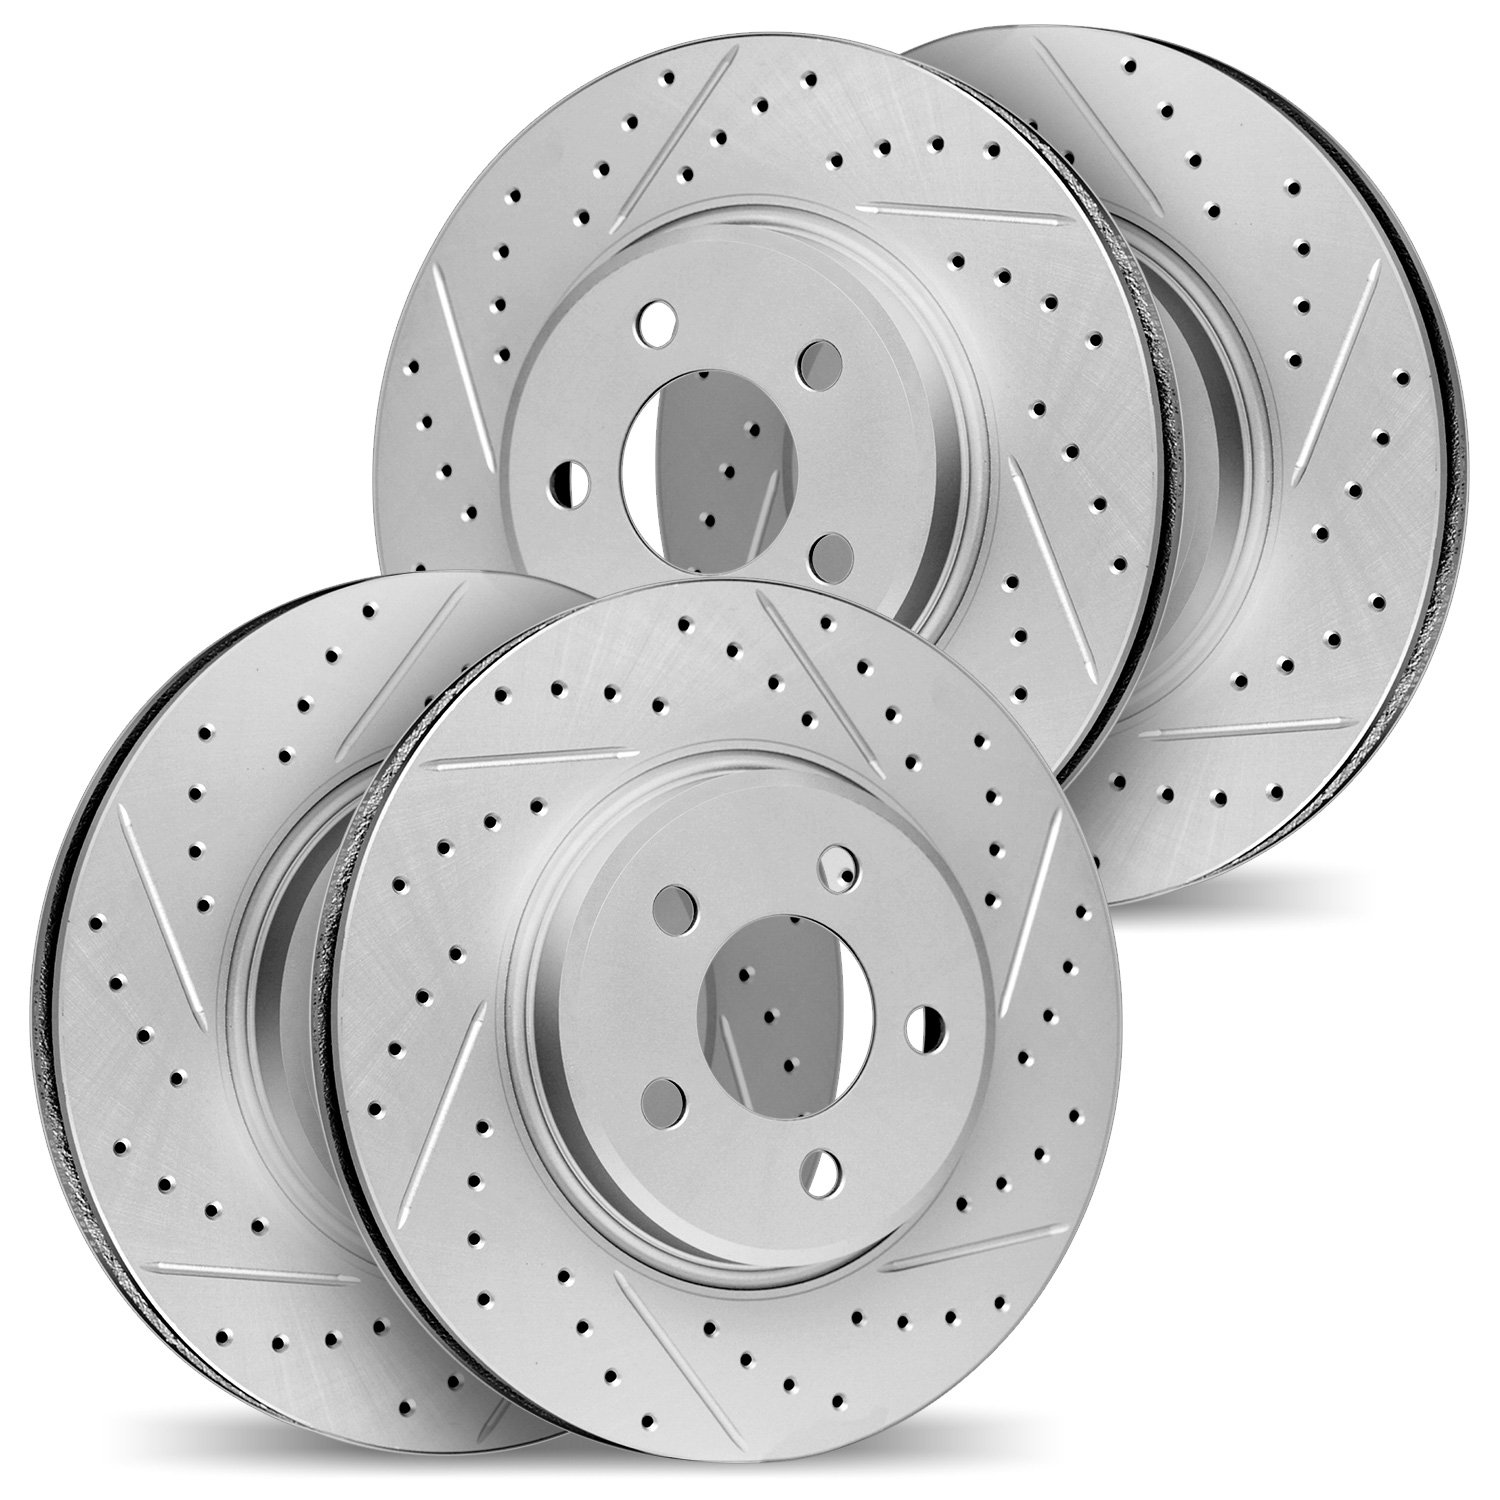 2004-31020 Geoperformance Drilled/Slotted Brake Rotors, 2007-2015 BMW, Position: Front and Rear